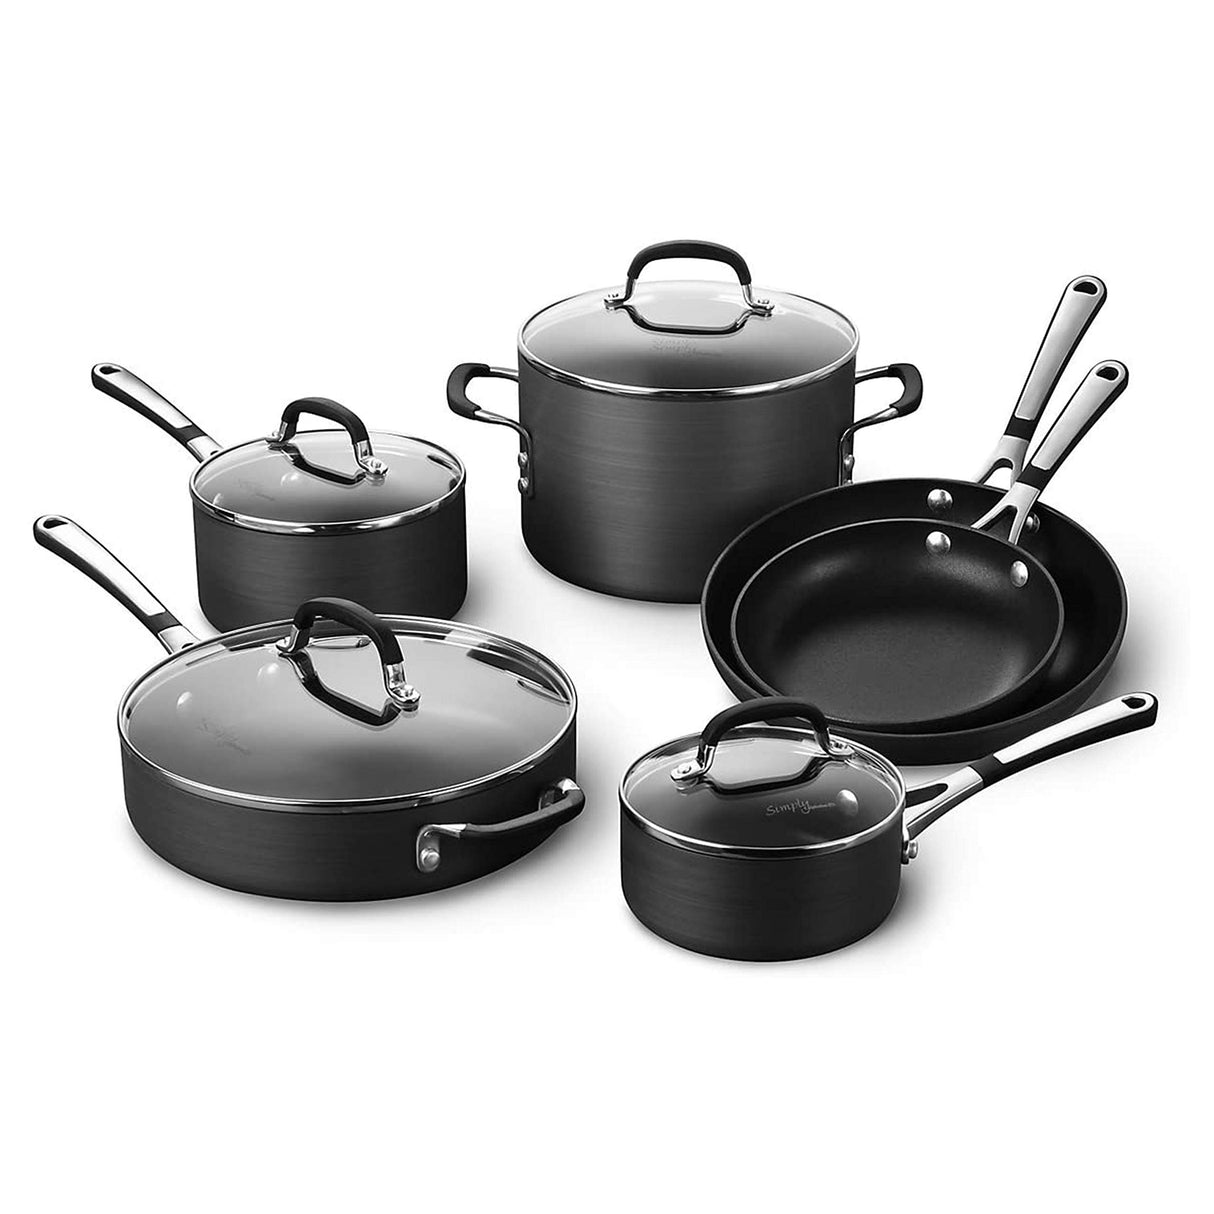 Calphalon 10-Piece Non-Stick Kitchen Cookware Set, Black Pots & Pans with Stay-Cool Stainless Steel Handles, Hard-Anodized Aluminum for Even Heating